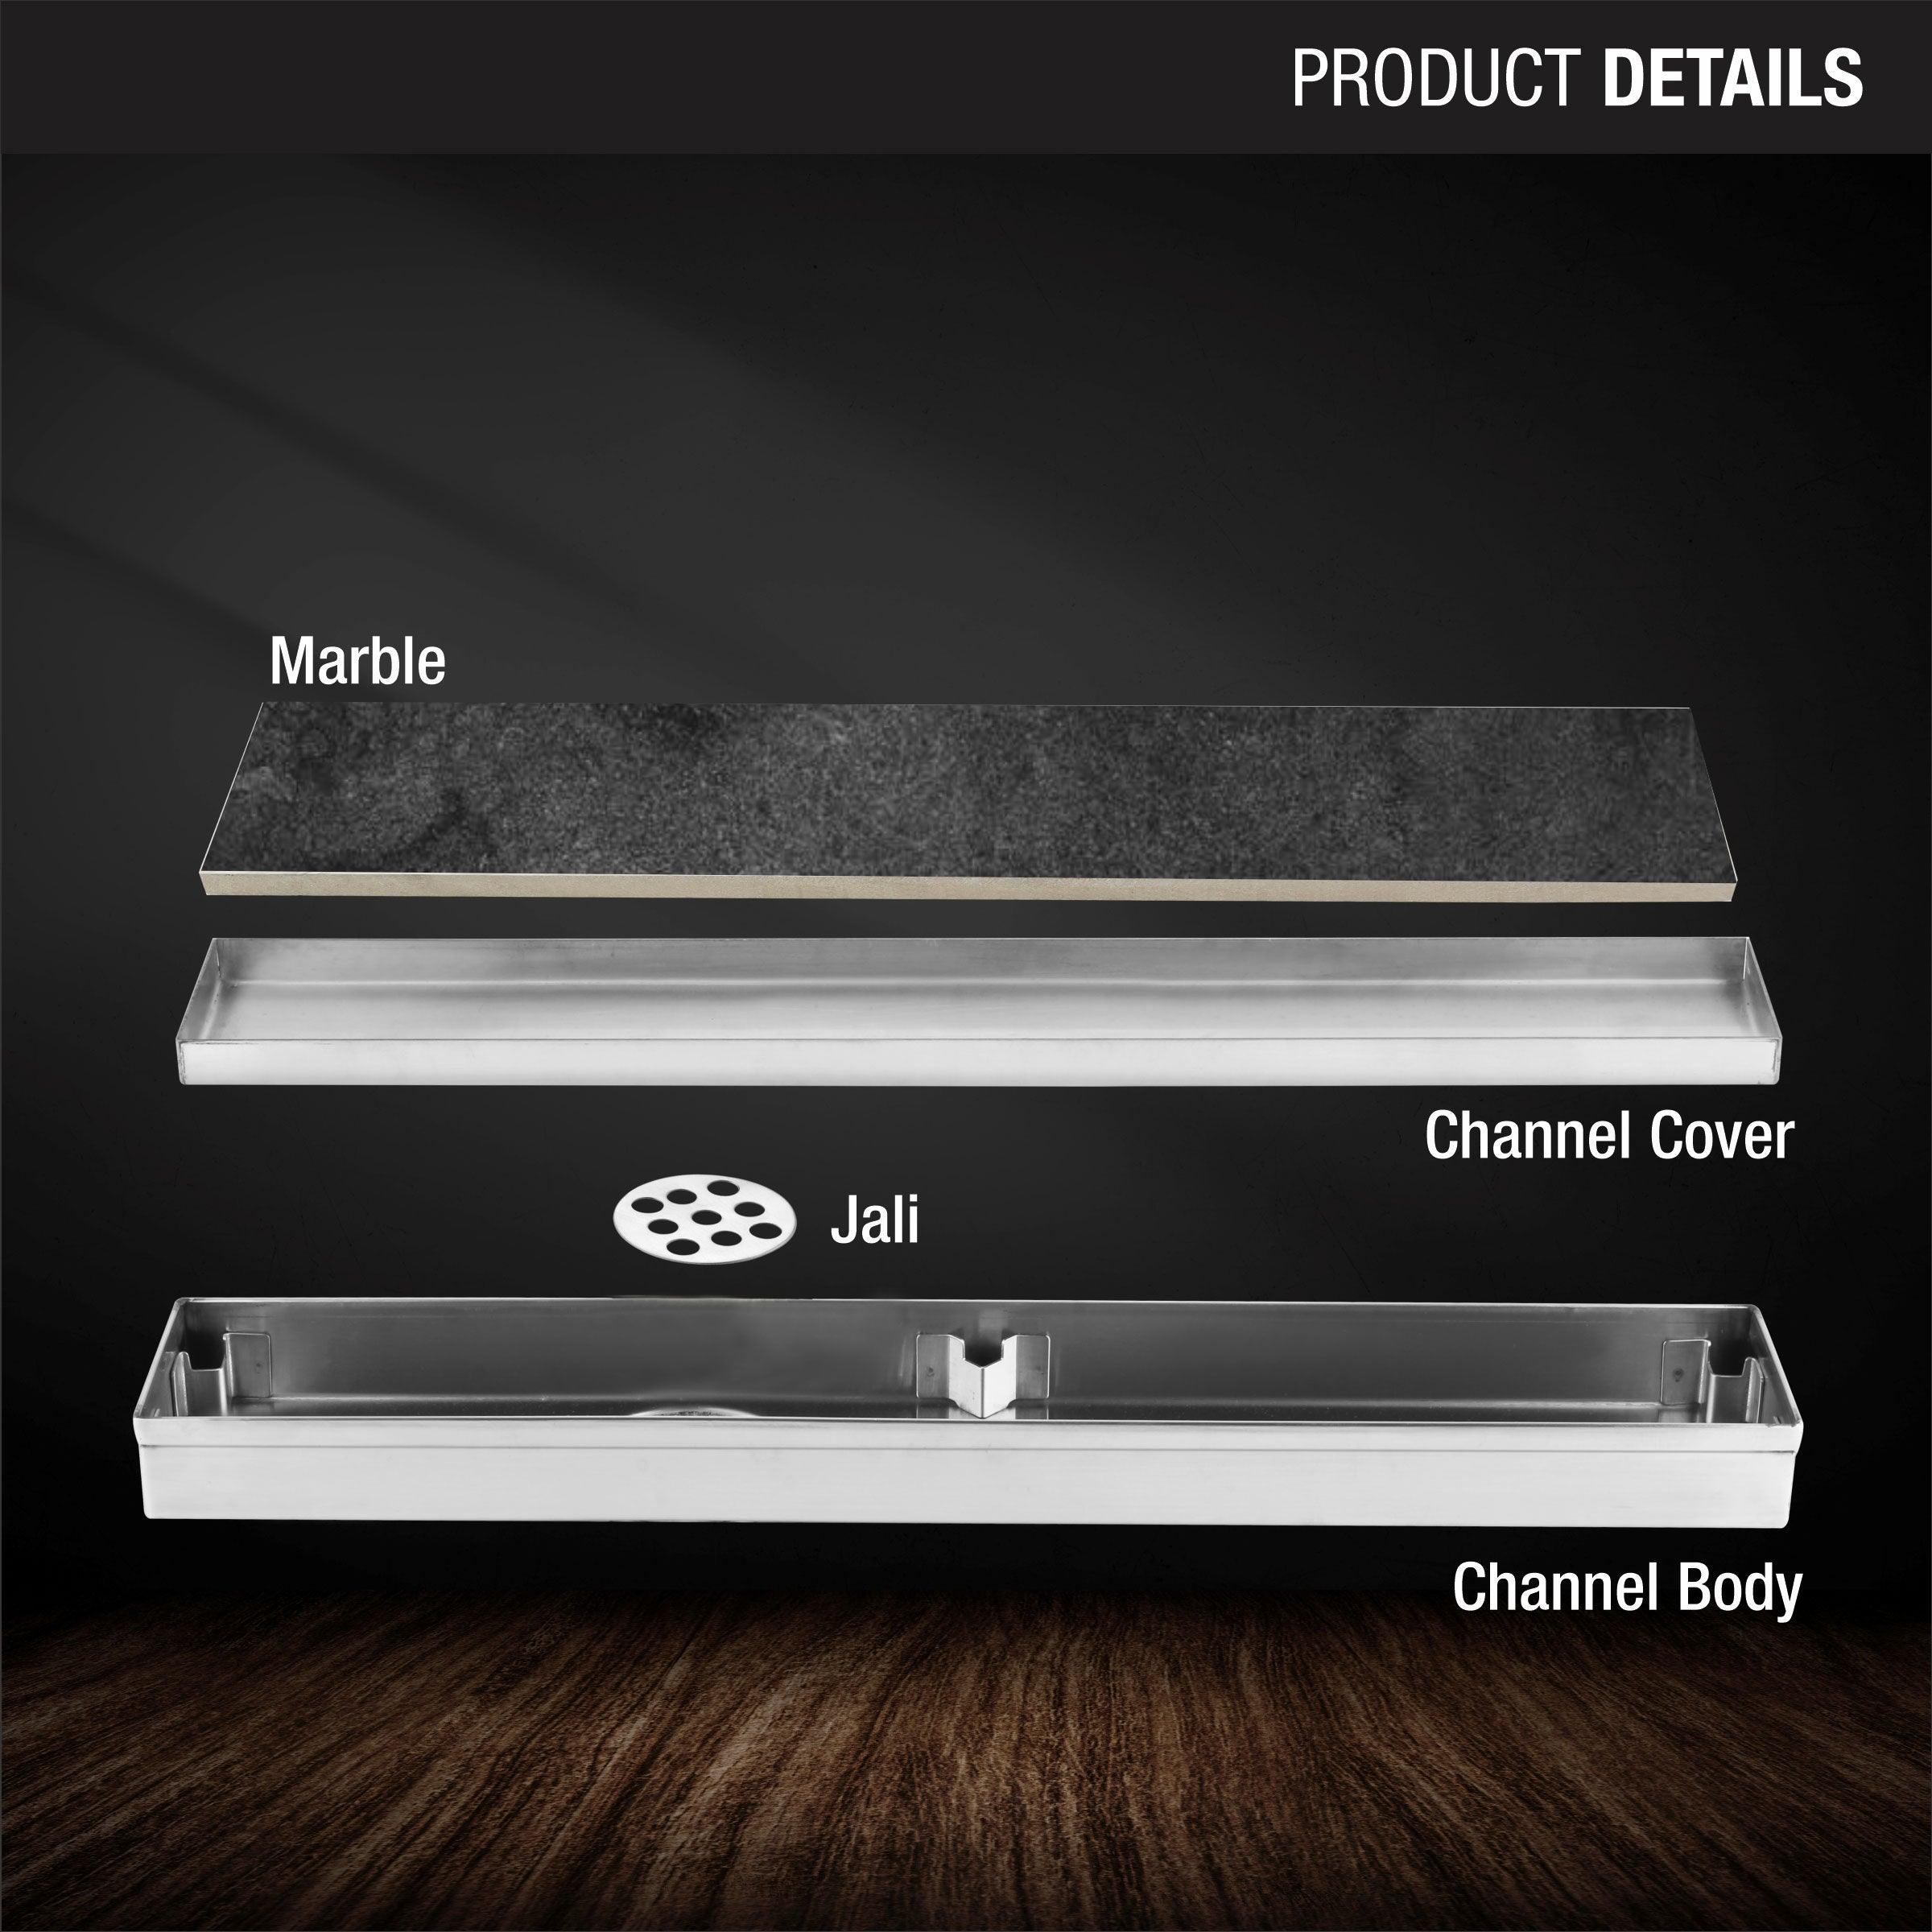 Marble Insert Shower Drain Channel (24 x 2 Inches) product details